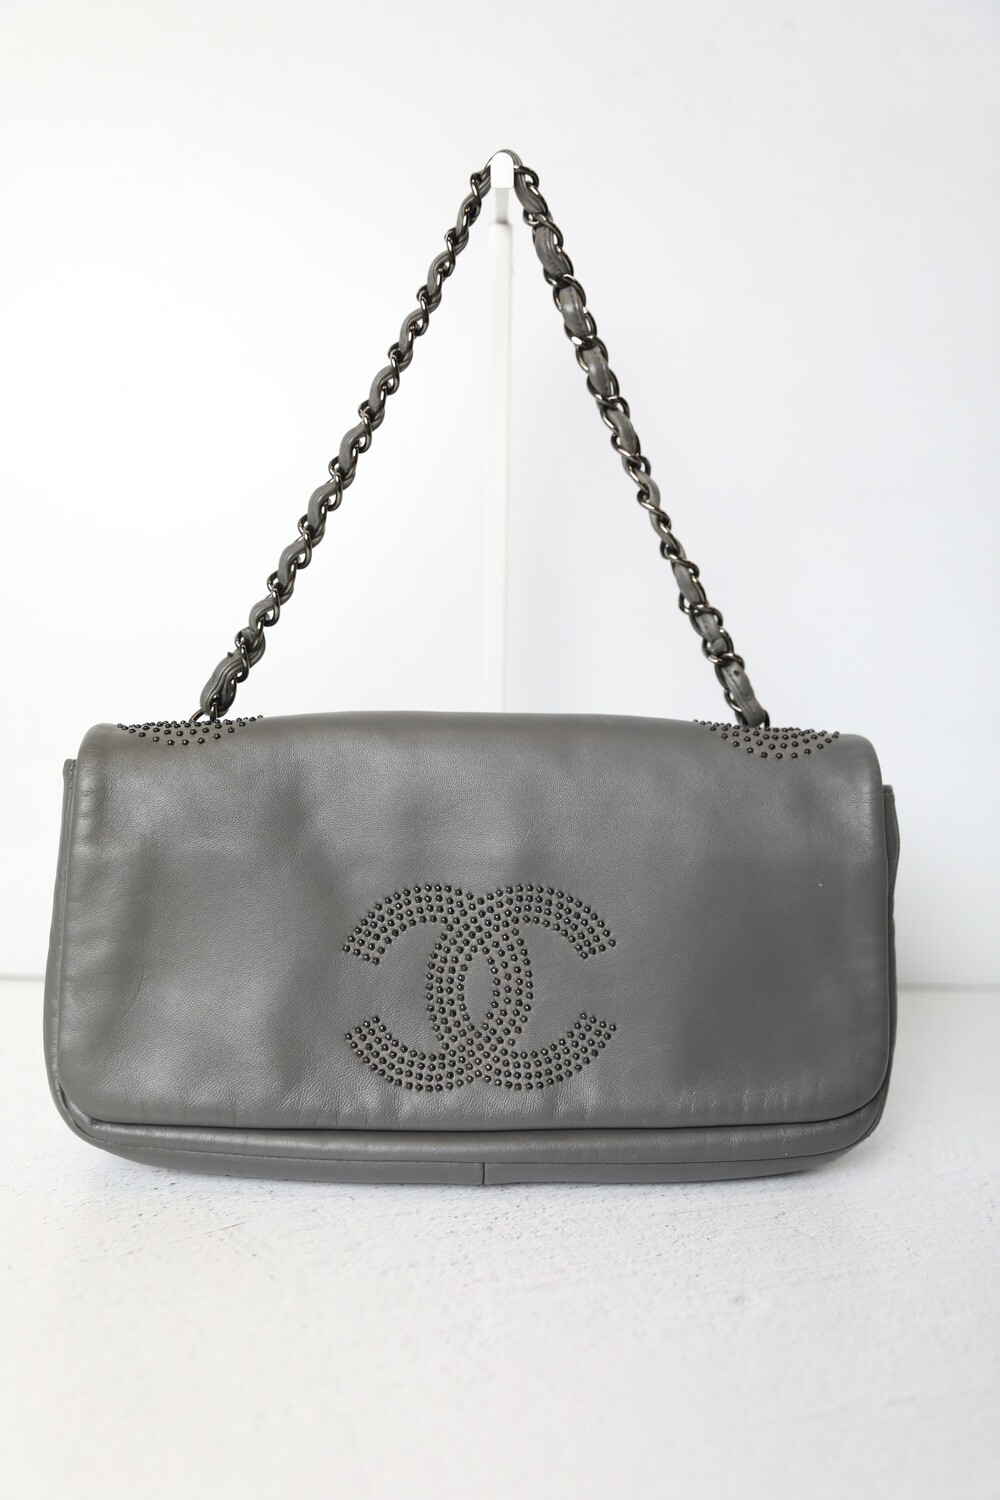 Chanel Seasonal Chain Around Flap, Beige Caviar Leather with Gold Hardware,  Preowned in Dustbag WA001 - Julia Rose Boston